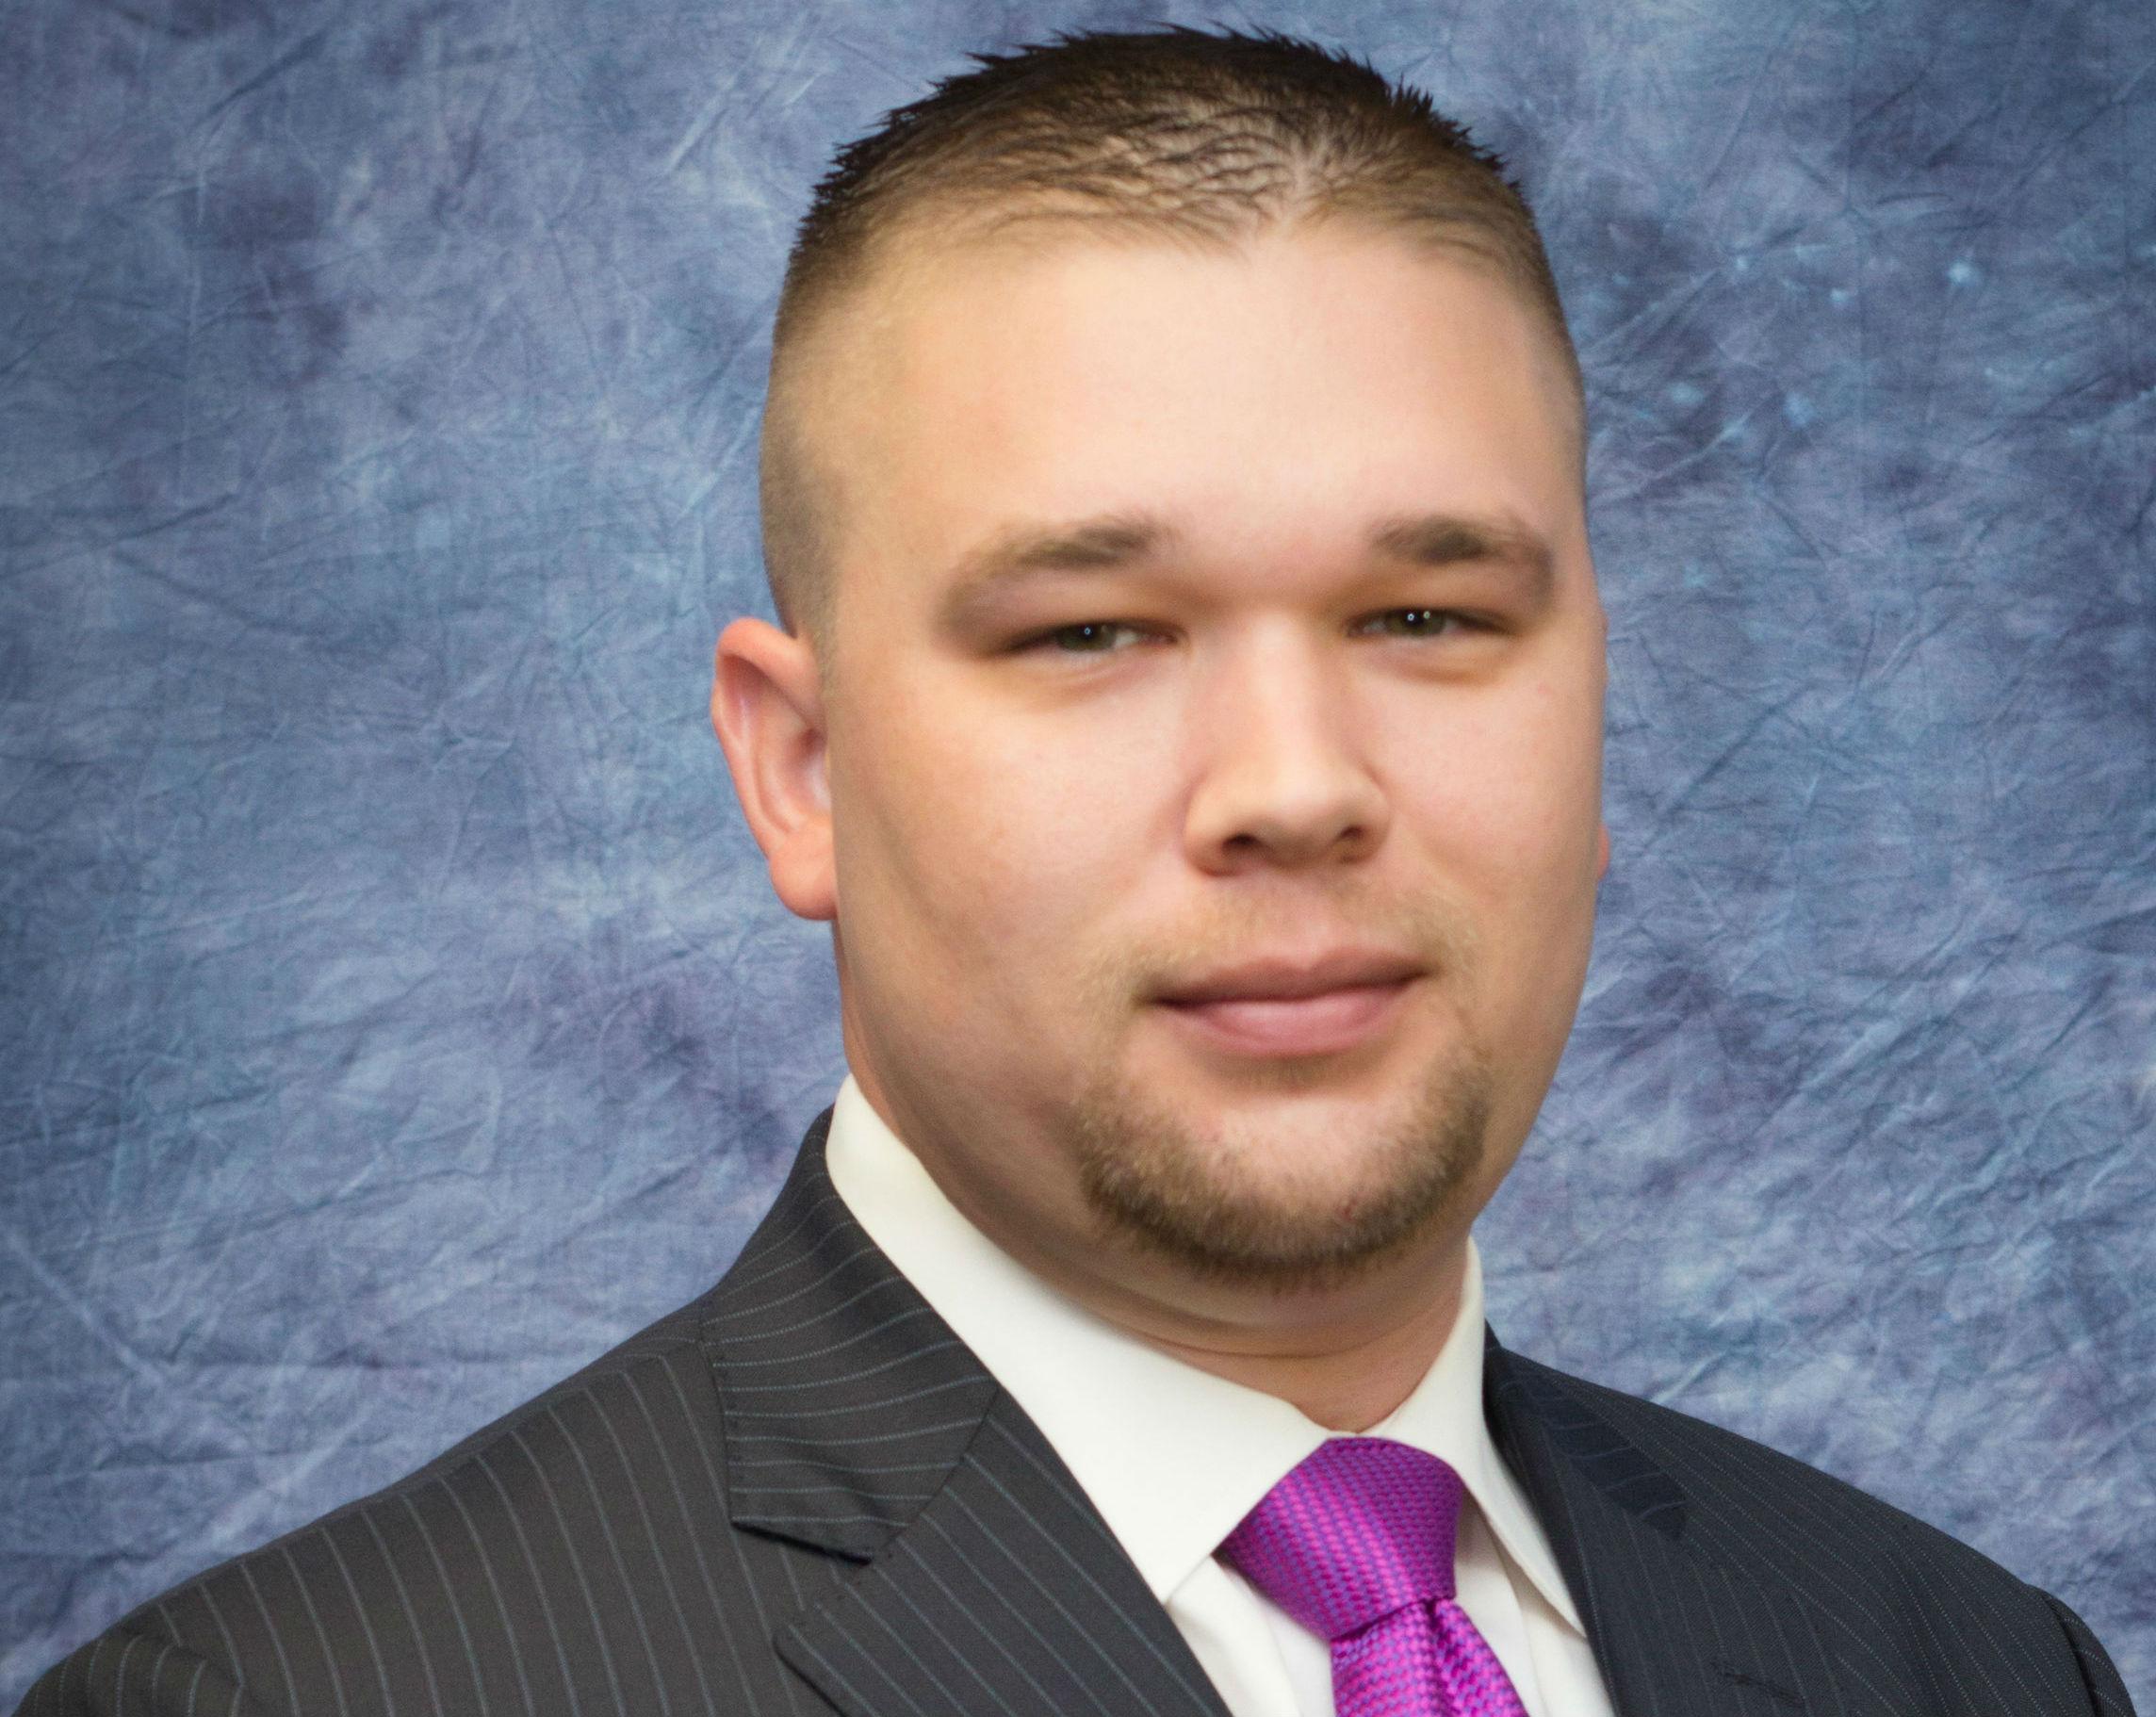 TYLER R. YOUNG Financial Professional & Insurance Agent